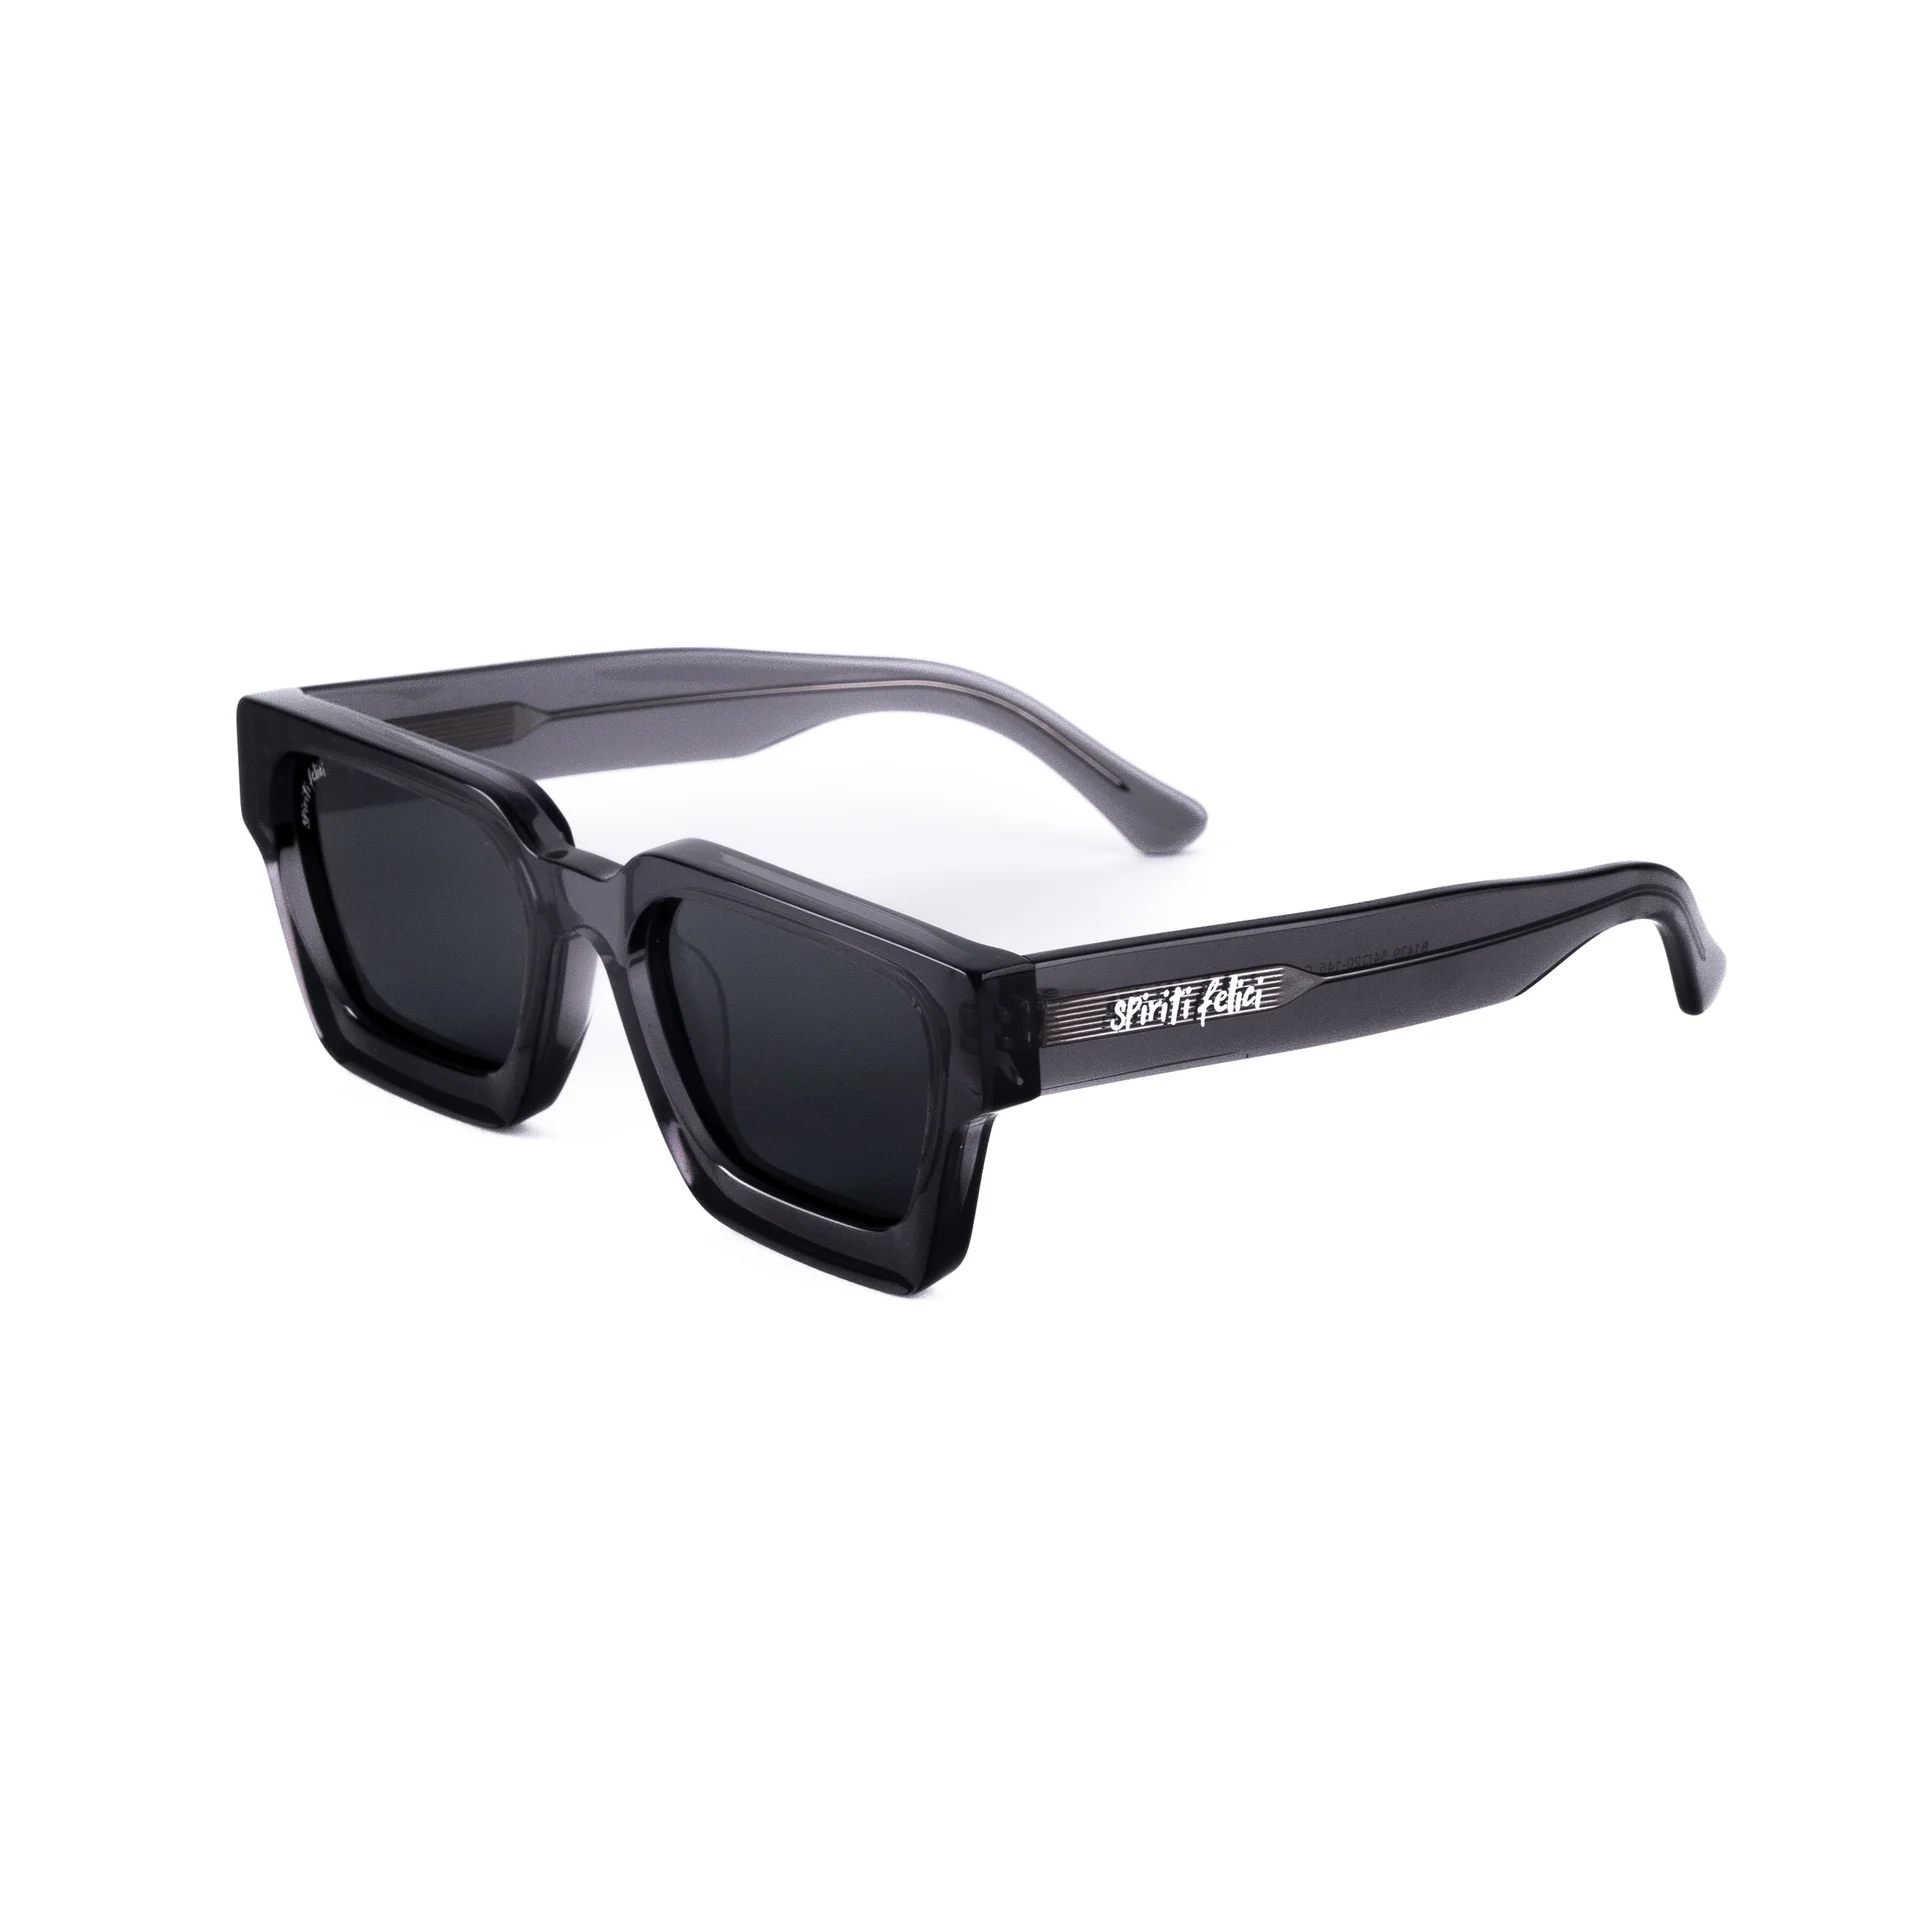 Buy SQUARE ROOT sunglasses from Spiriti Felici available online at VEND. Explore more product category collections now